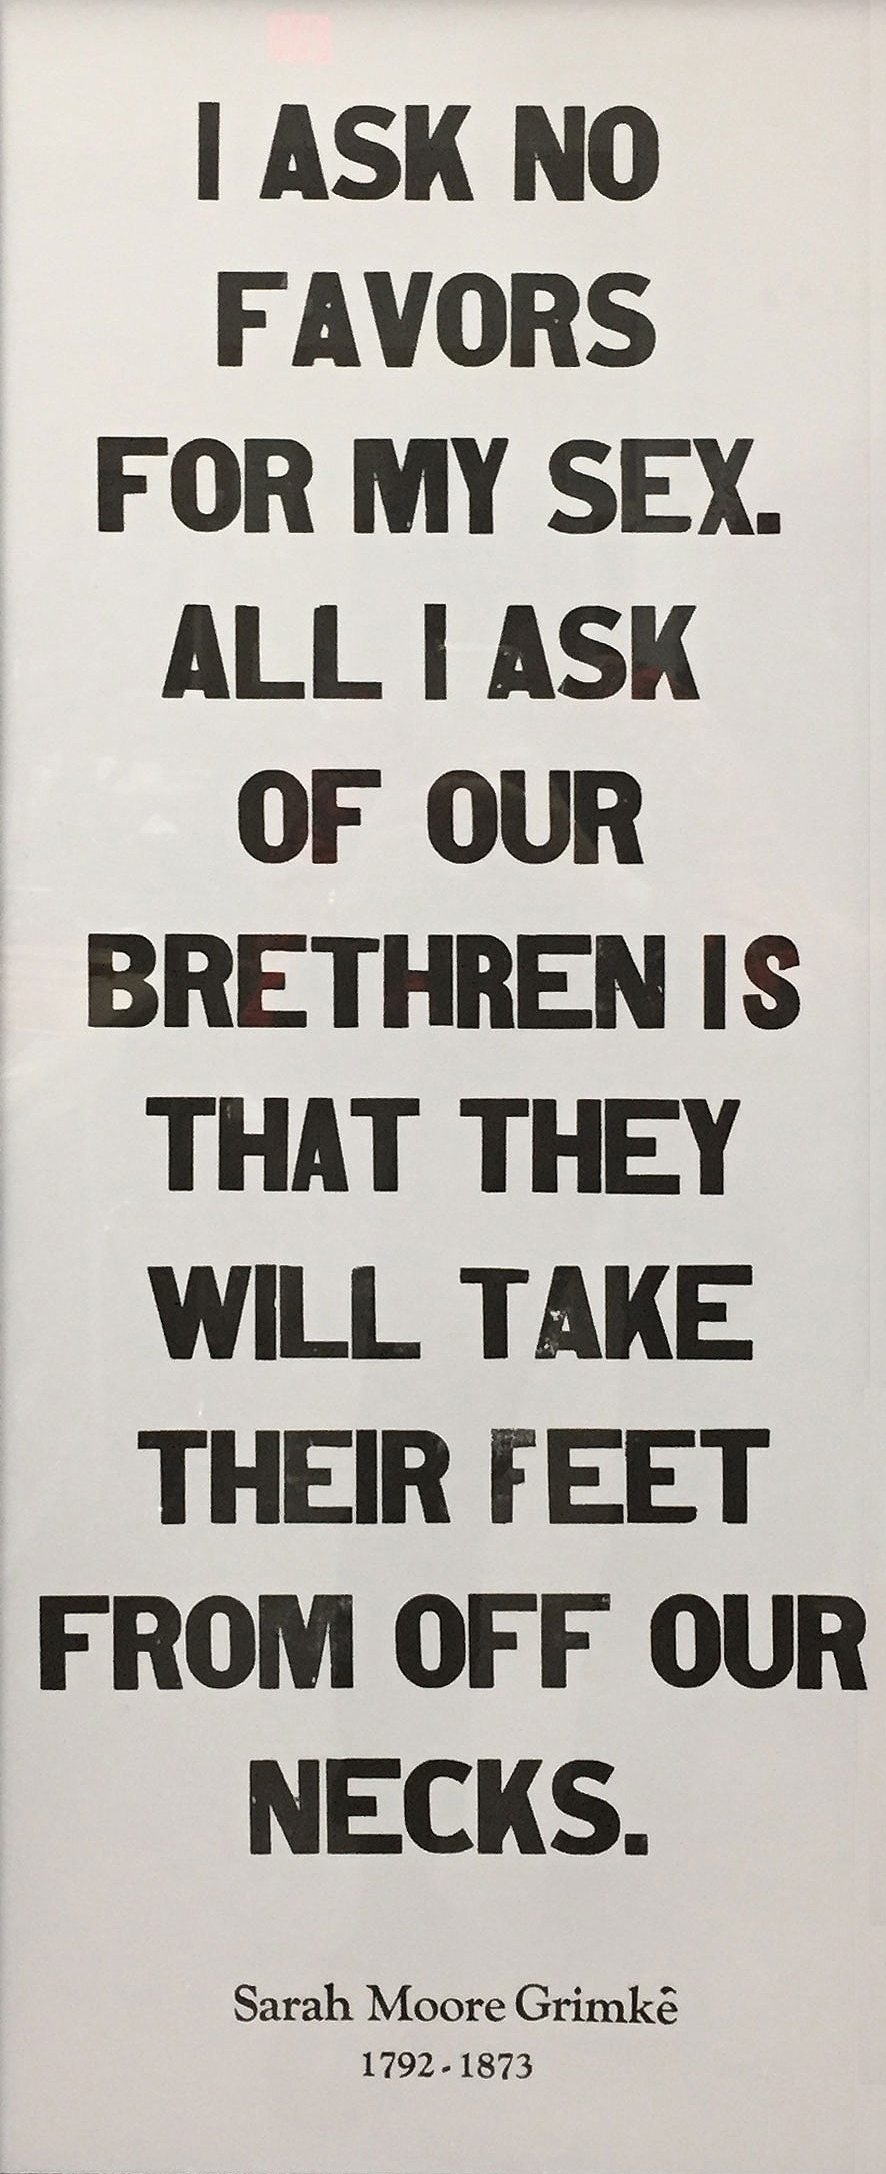 Necks by Lois Harada B&W broadsheet letterpress poster featuring quote by SArah Moore Grimké